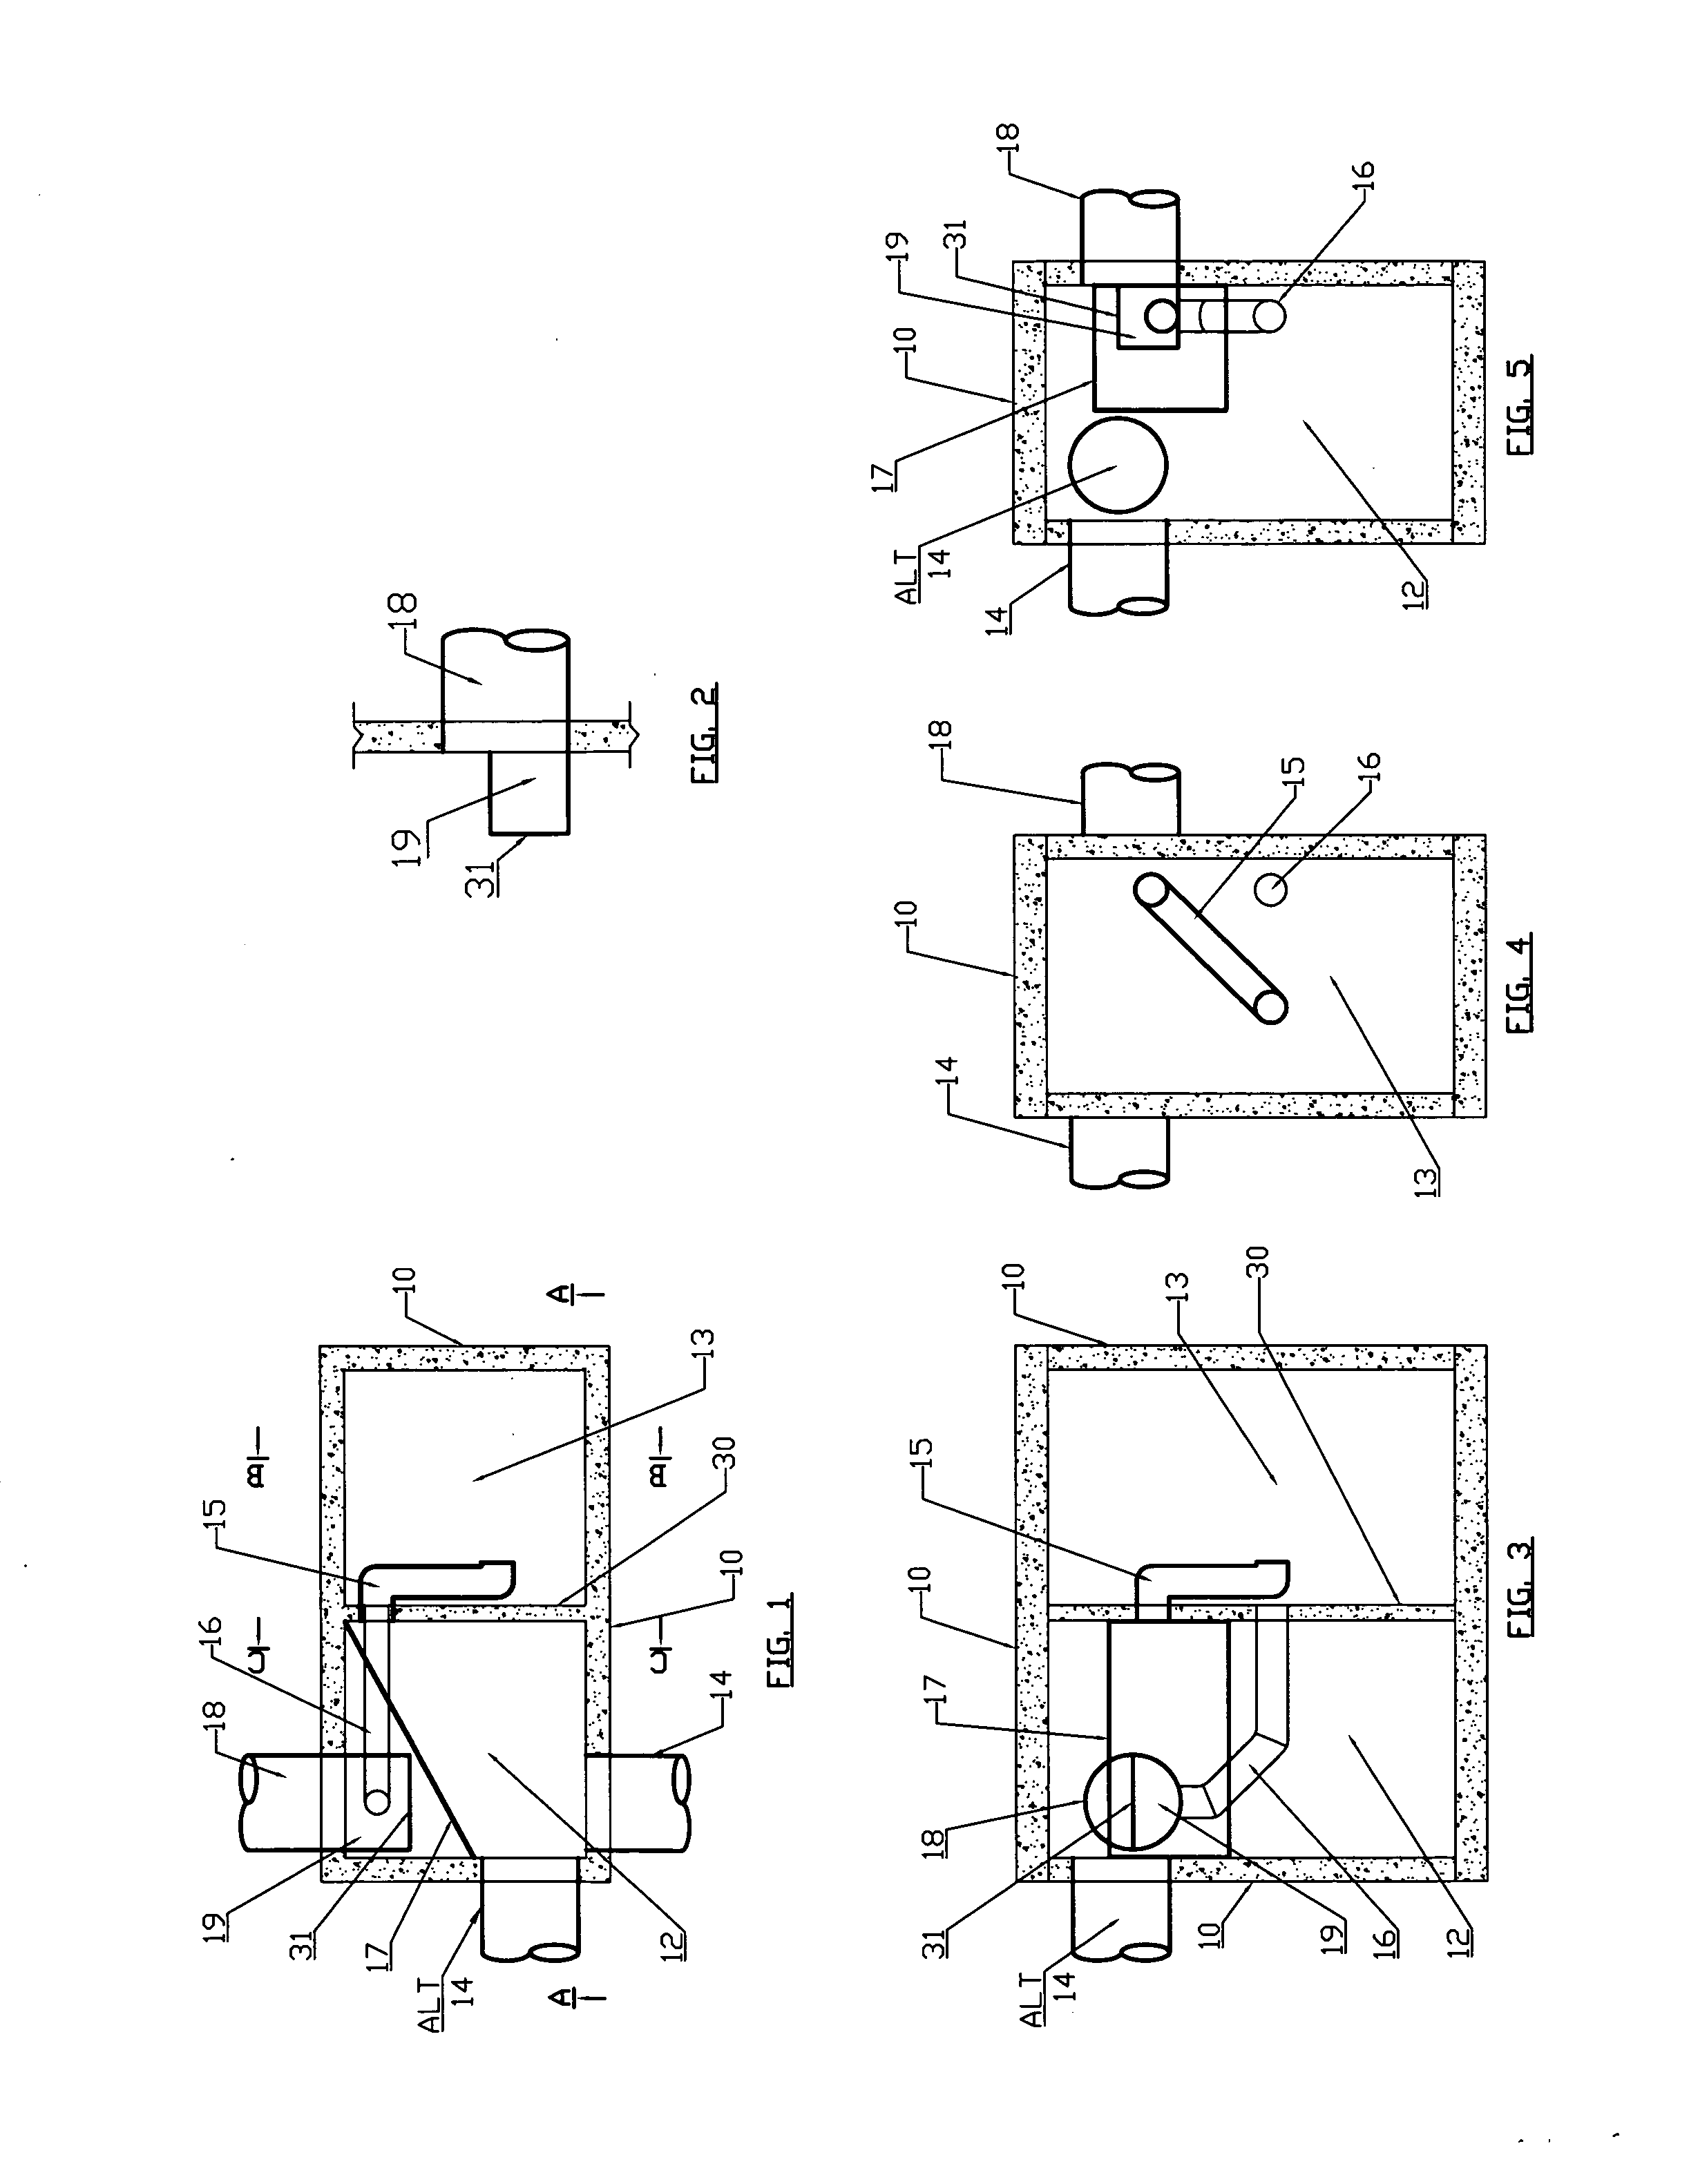 Apparatus for separating a light fluid from a heavy one and/or removing sediment from a fluid stream